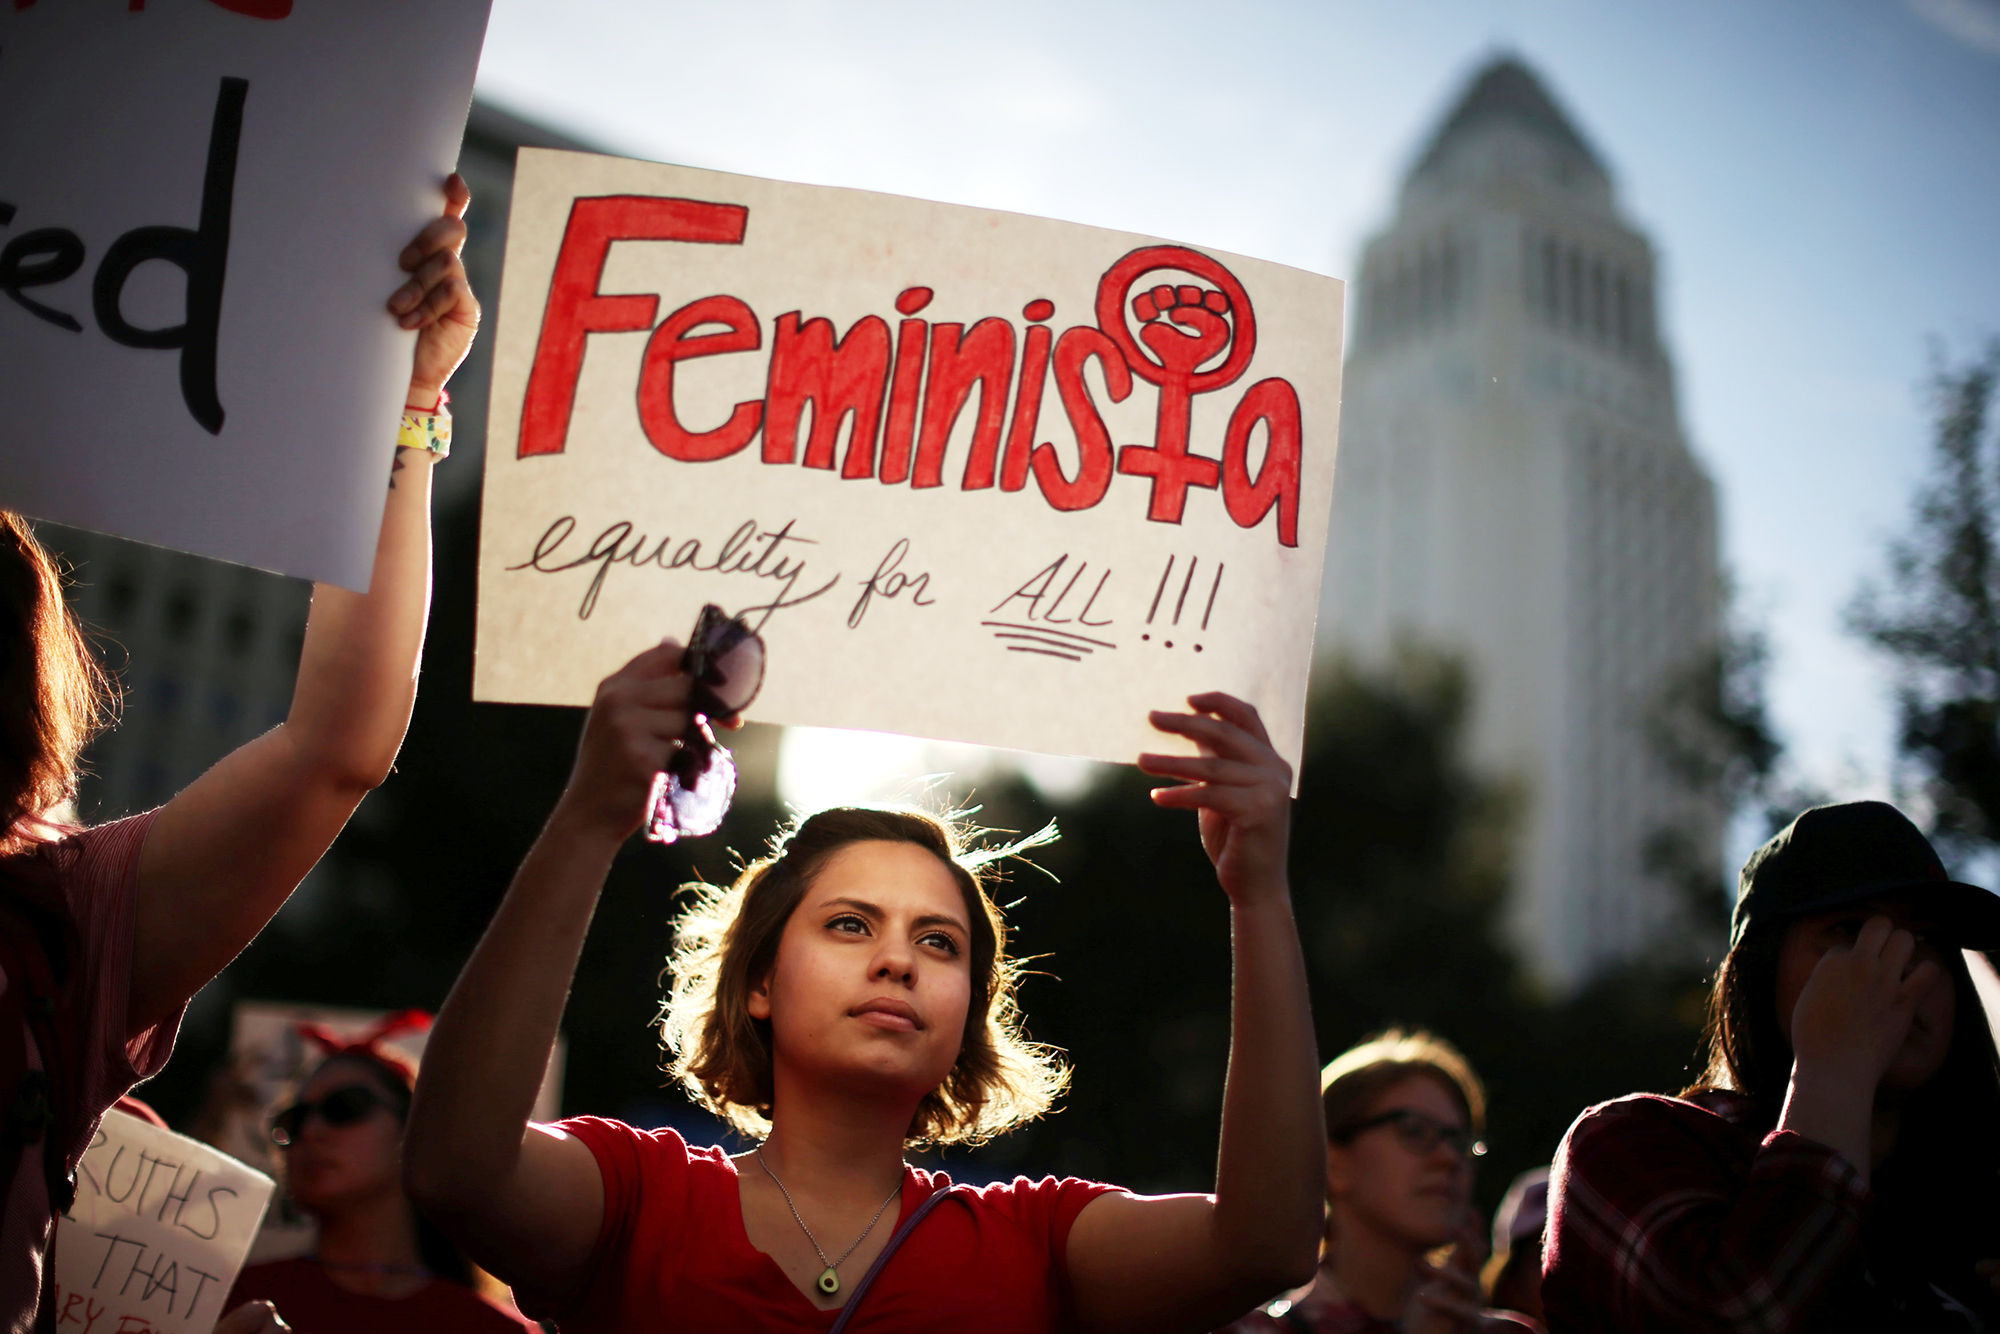 Mary Arevalo, 29, participates in the International Women's Day 